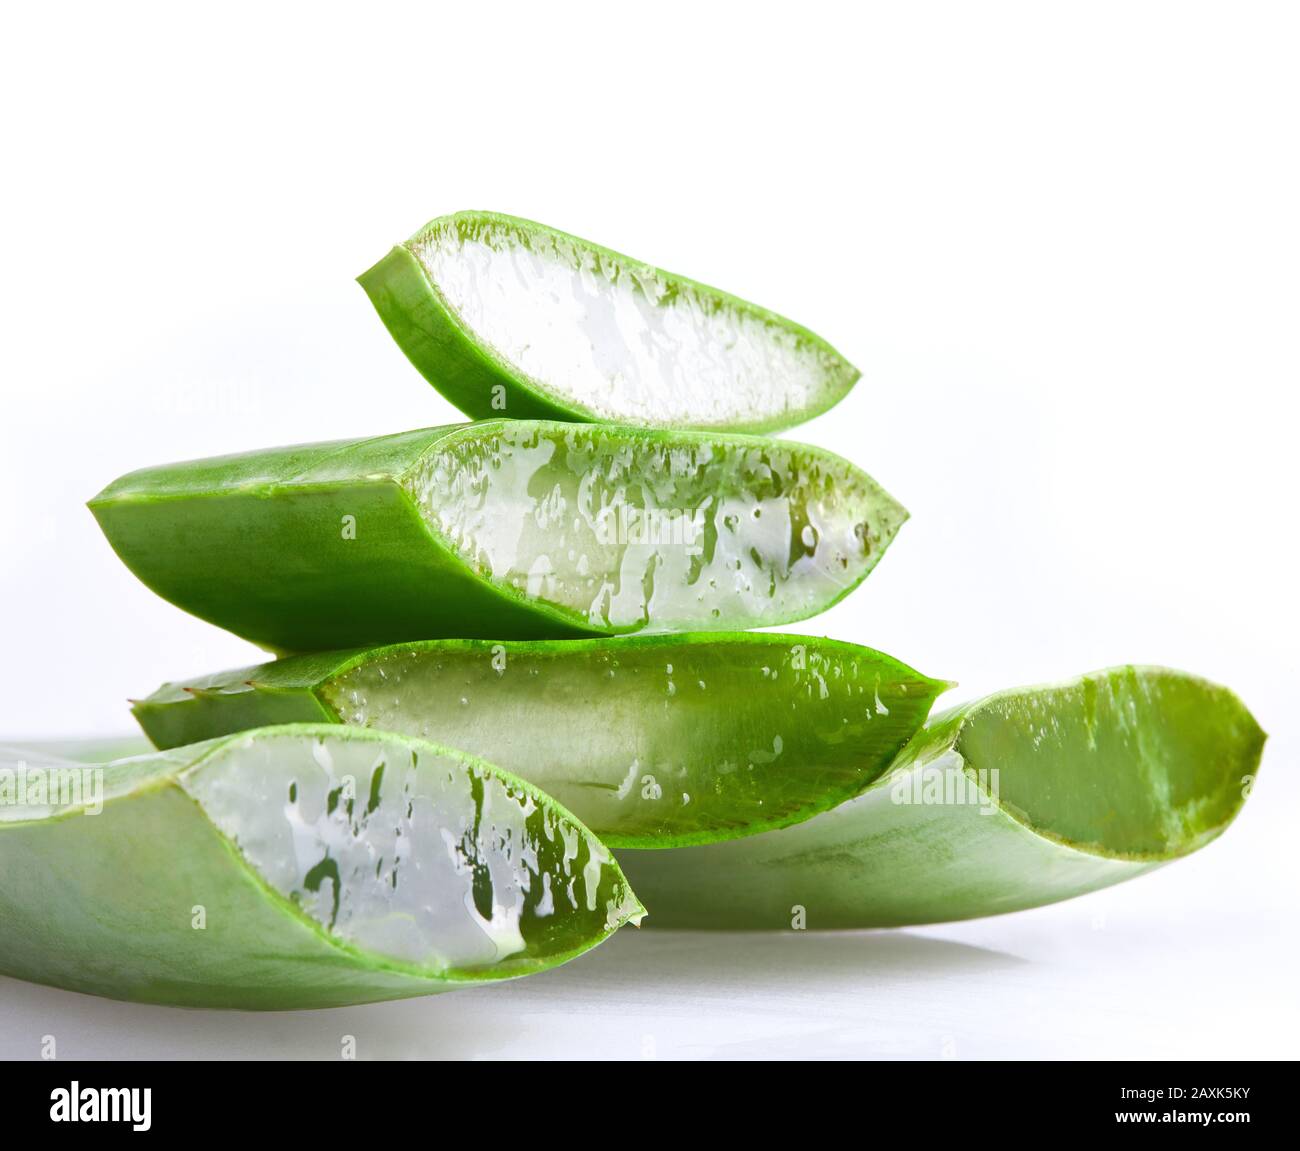 Sliced Aloe Vera closeup. Aloe plant is used as main ingredient for natural organic renewal cosmetics, herbal medicine. Organic skin care concept. Iso Stock Photo